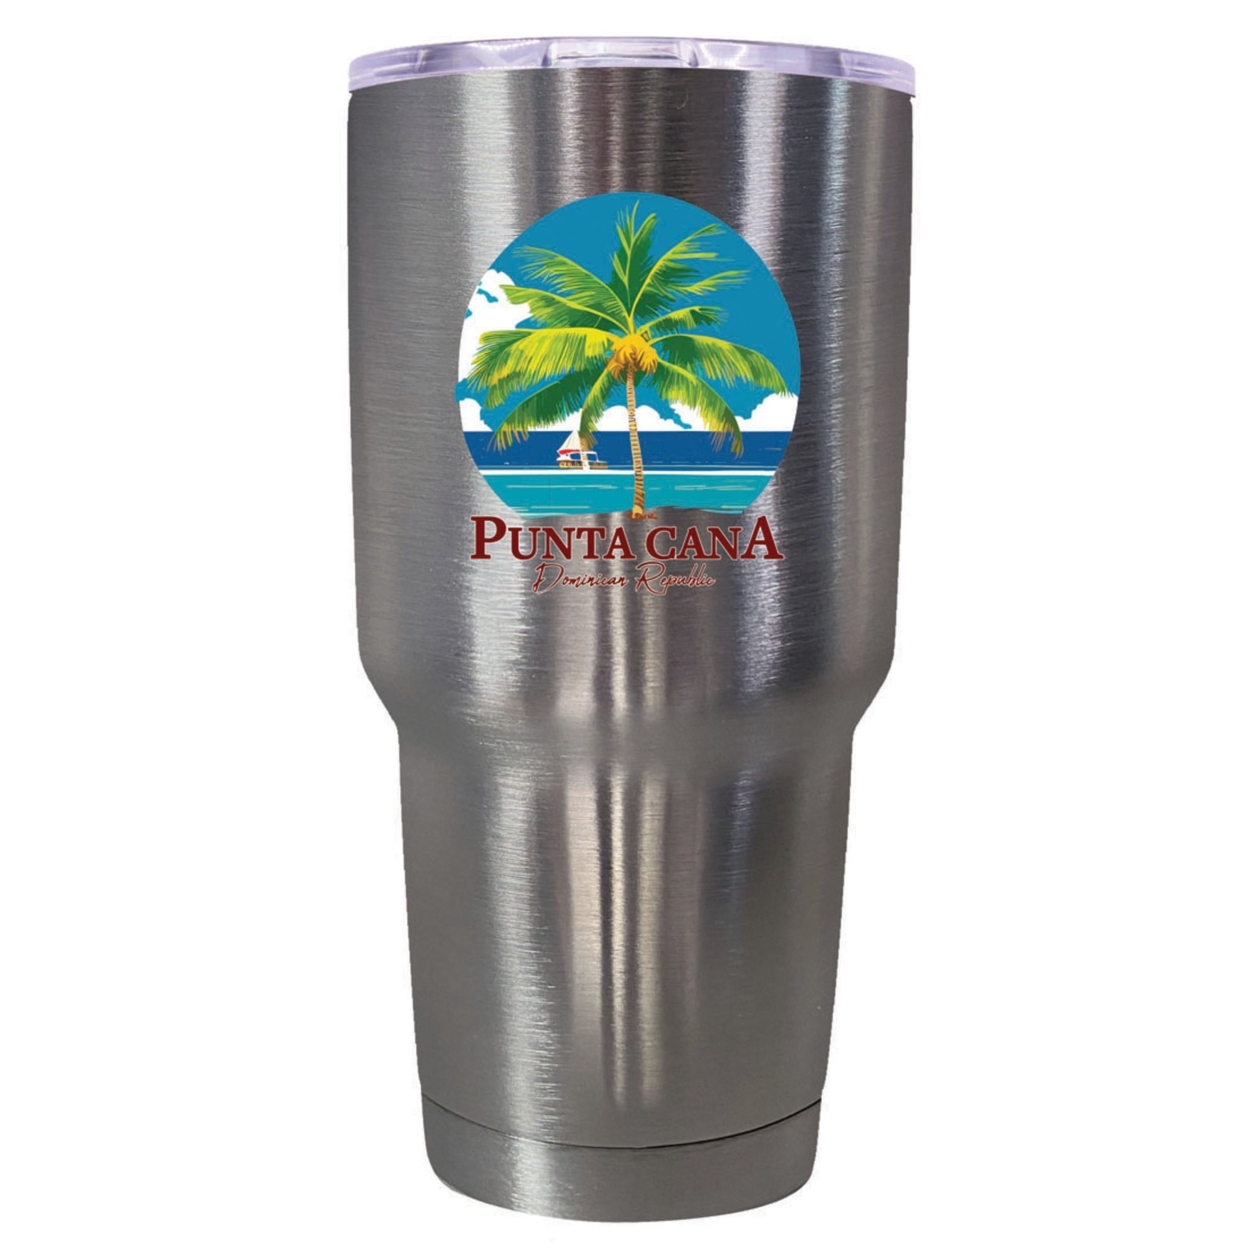 Punta Cana Dominican Republic Souvenir 24 Oz Insulated Stainless Steel Tumbler - Red, PARROT